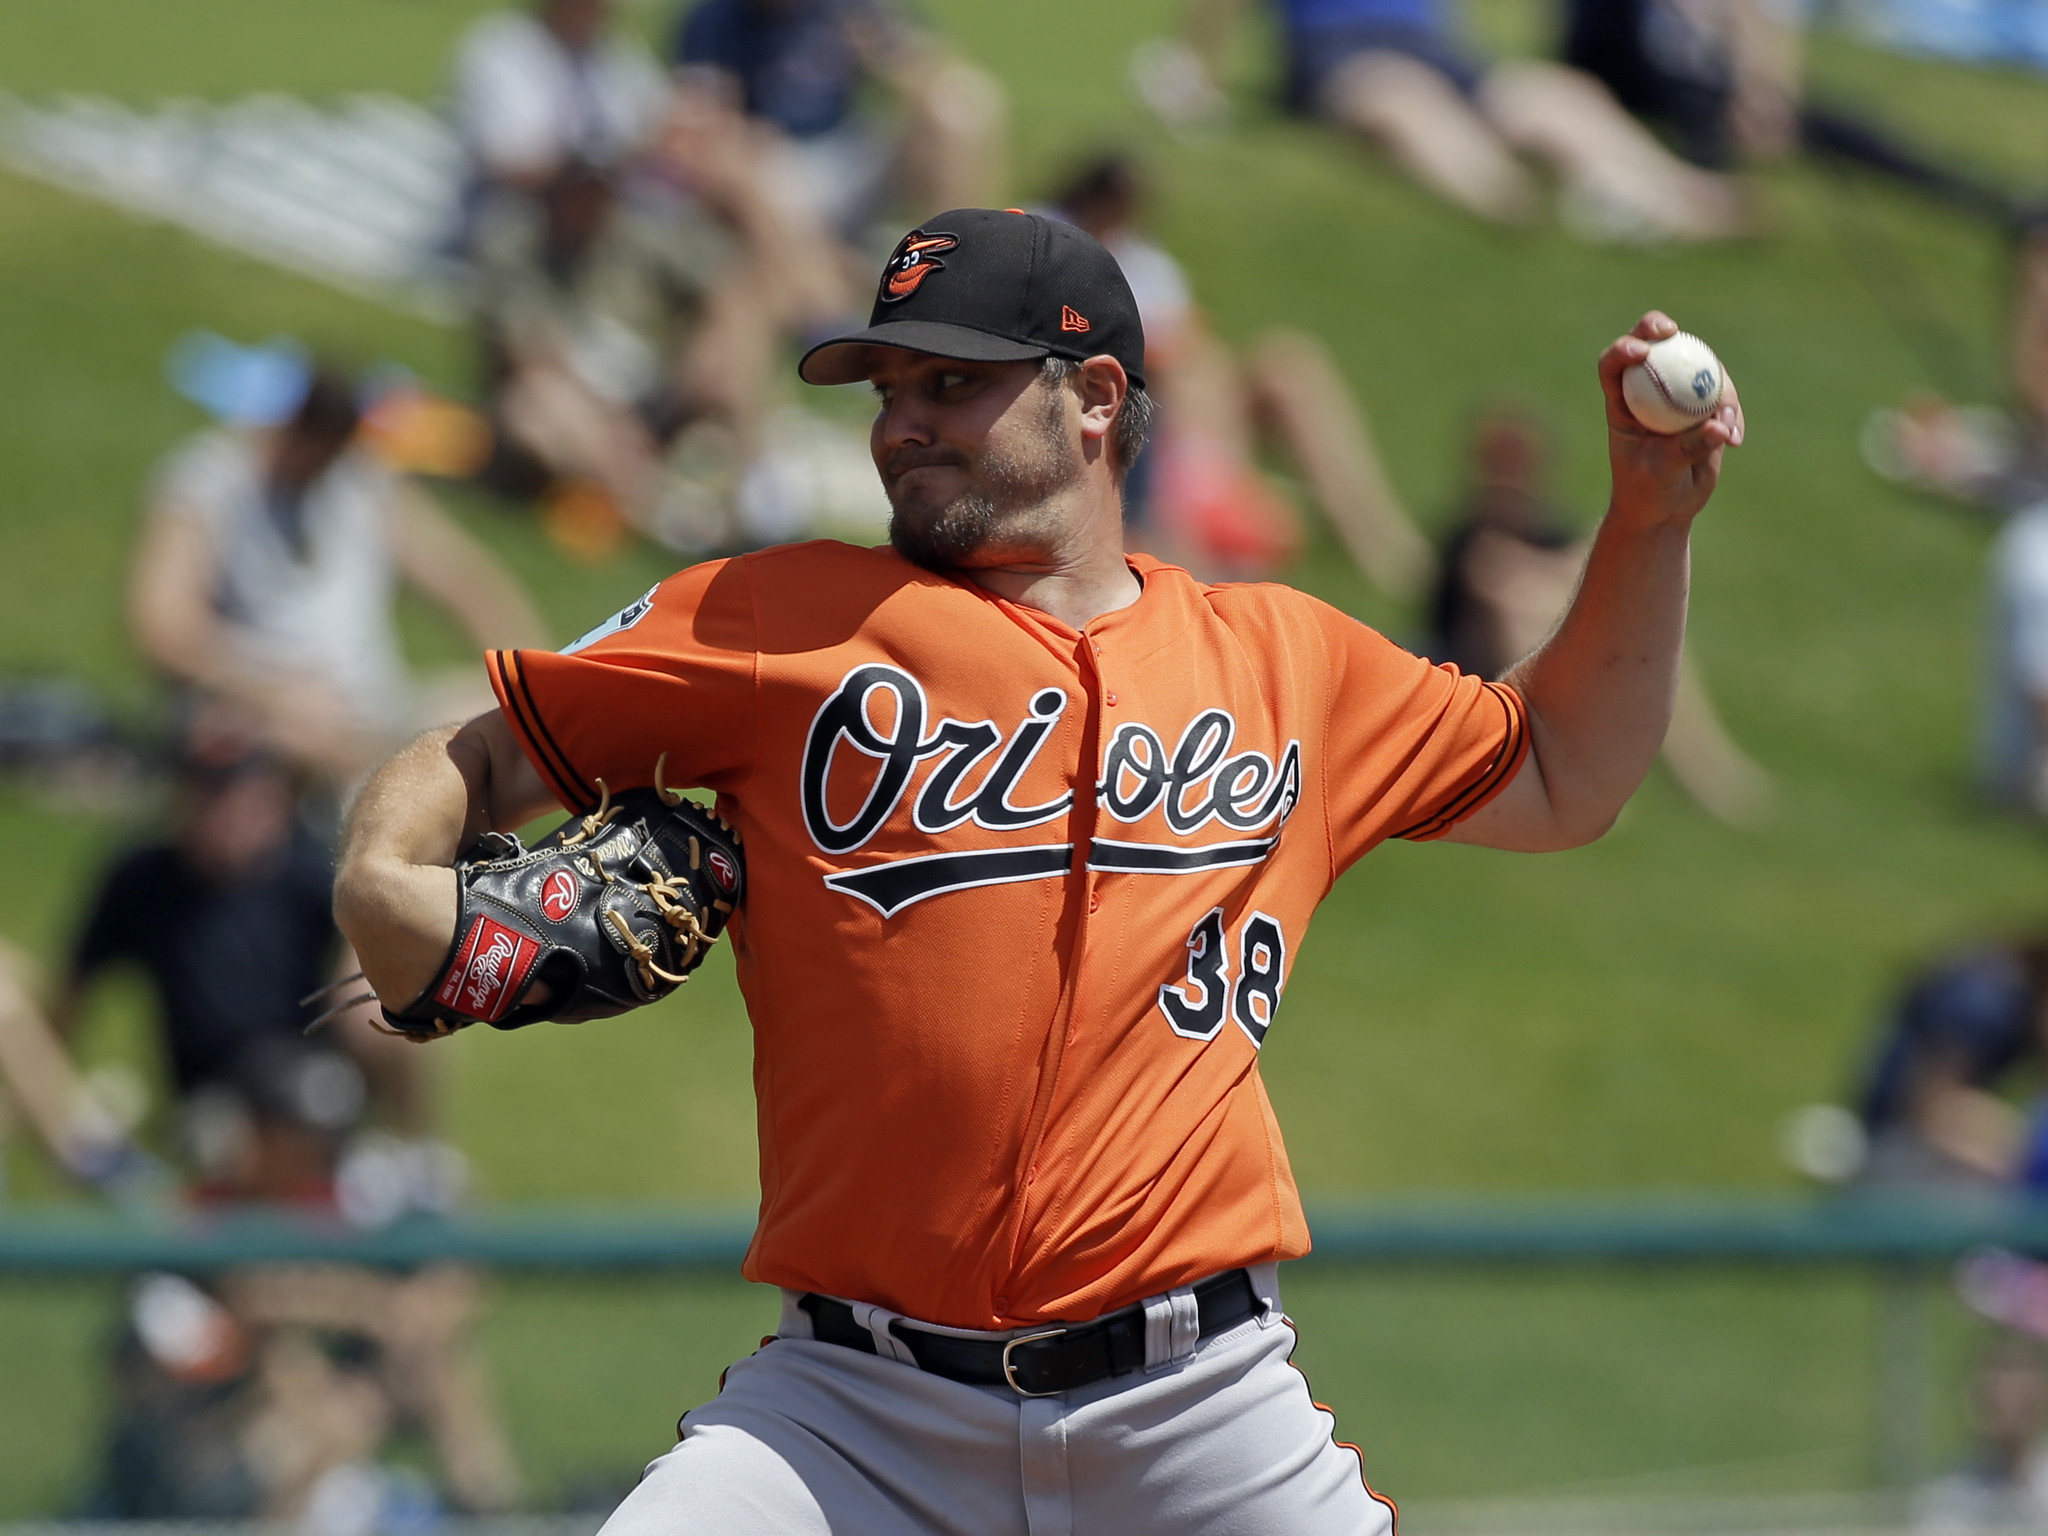 Little clarity added to Orioles roster decisions after Tuesday's developments